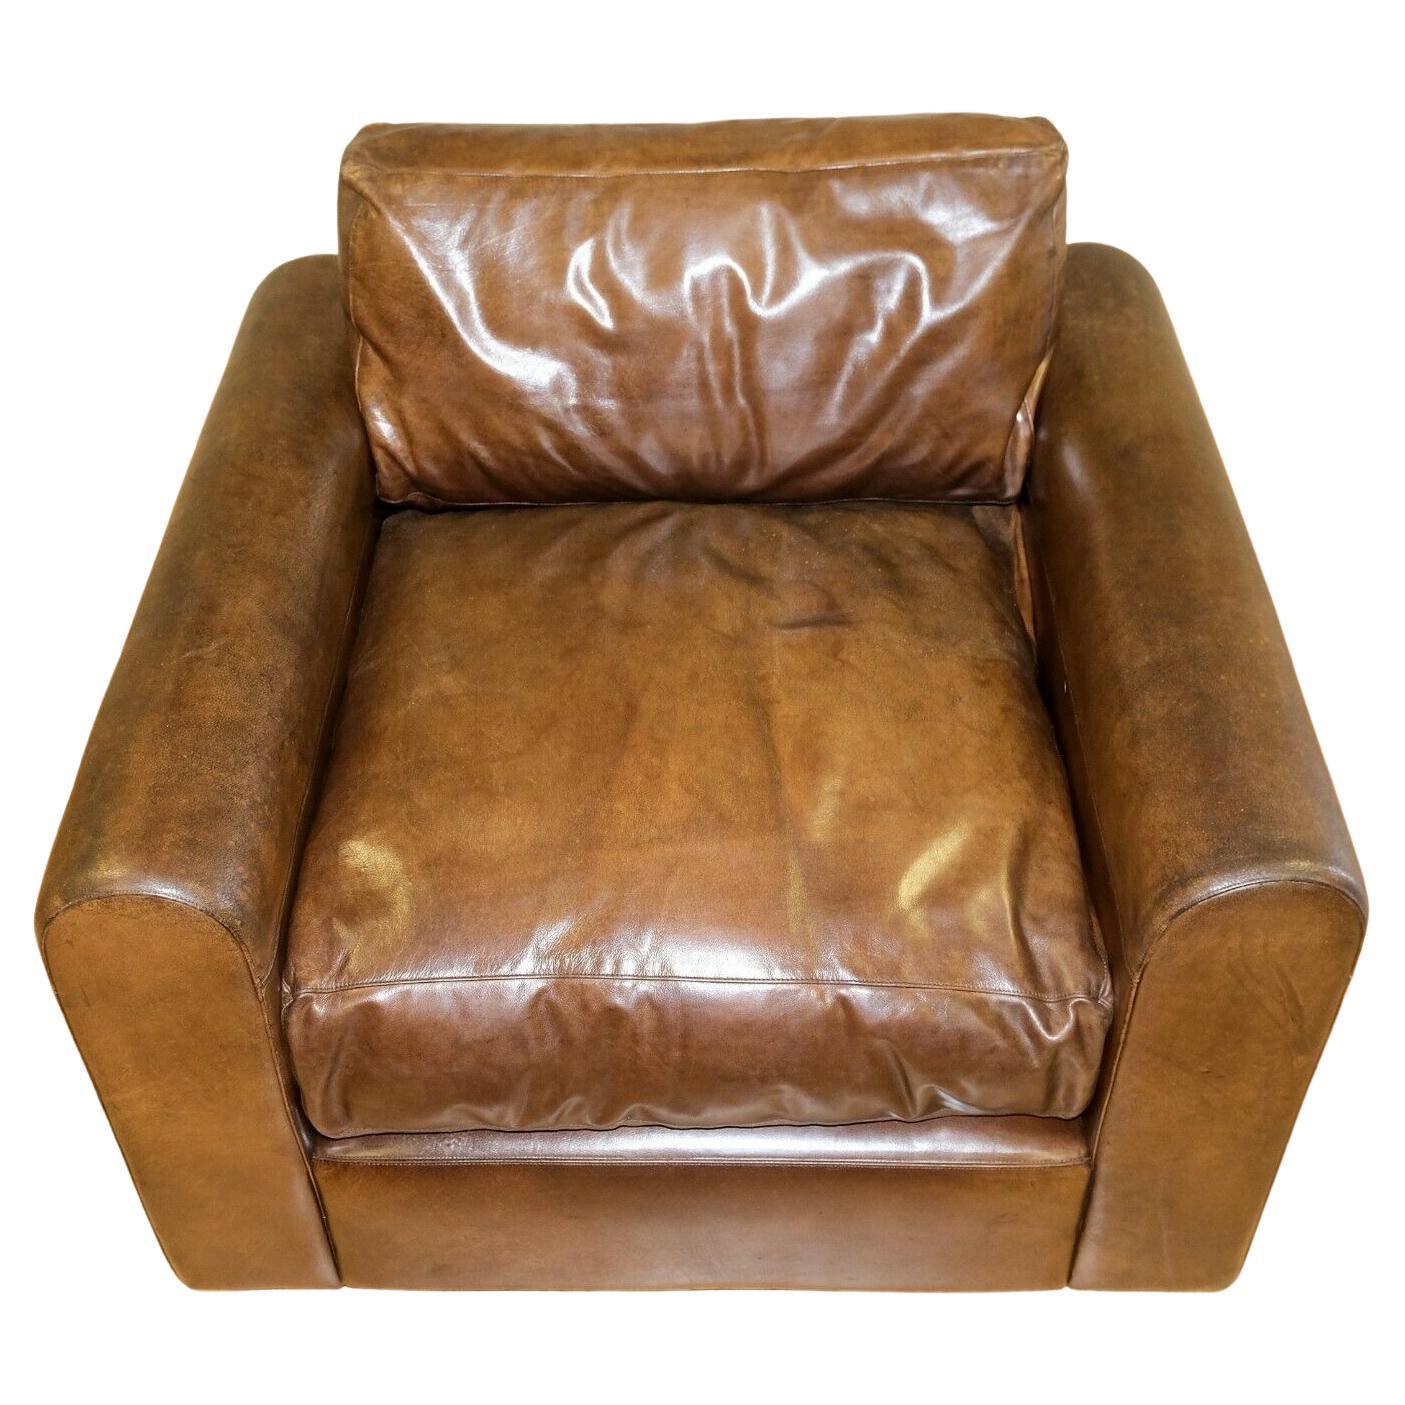 KOMFORTABEL ALMA HOME BROWN LEATHER ARMCHAIR WiTH FEATHER FILLED CUSHIONS